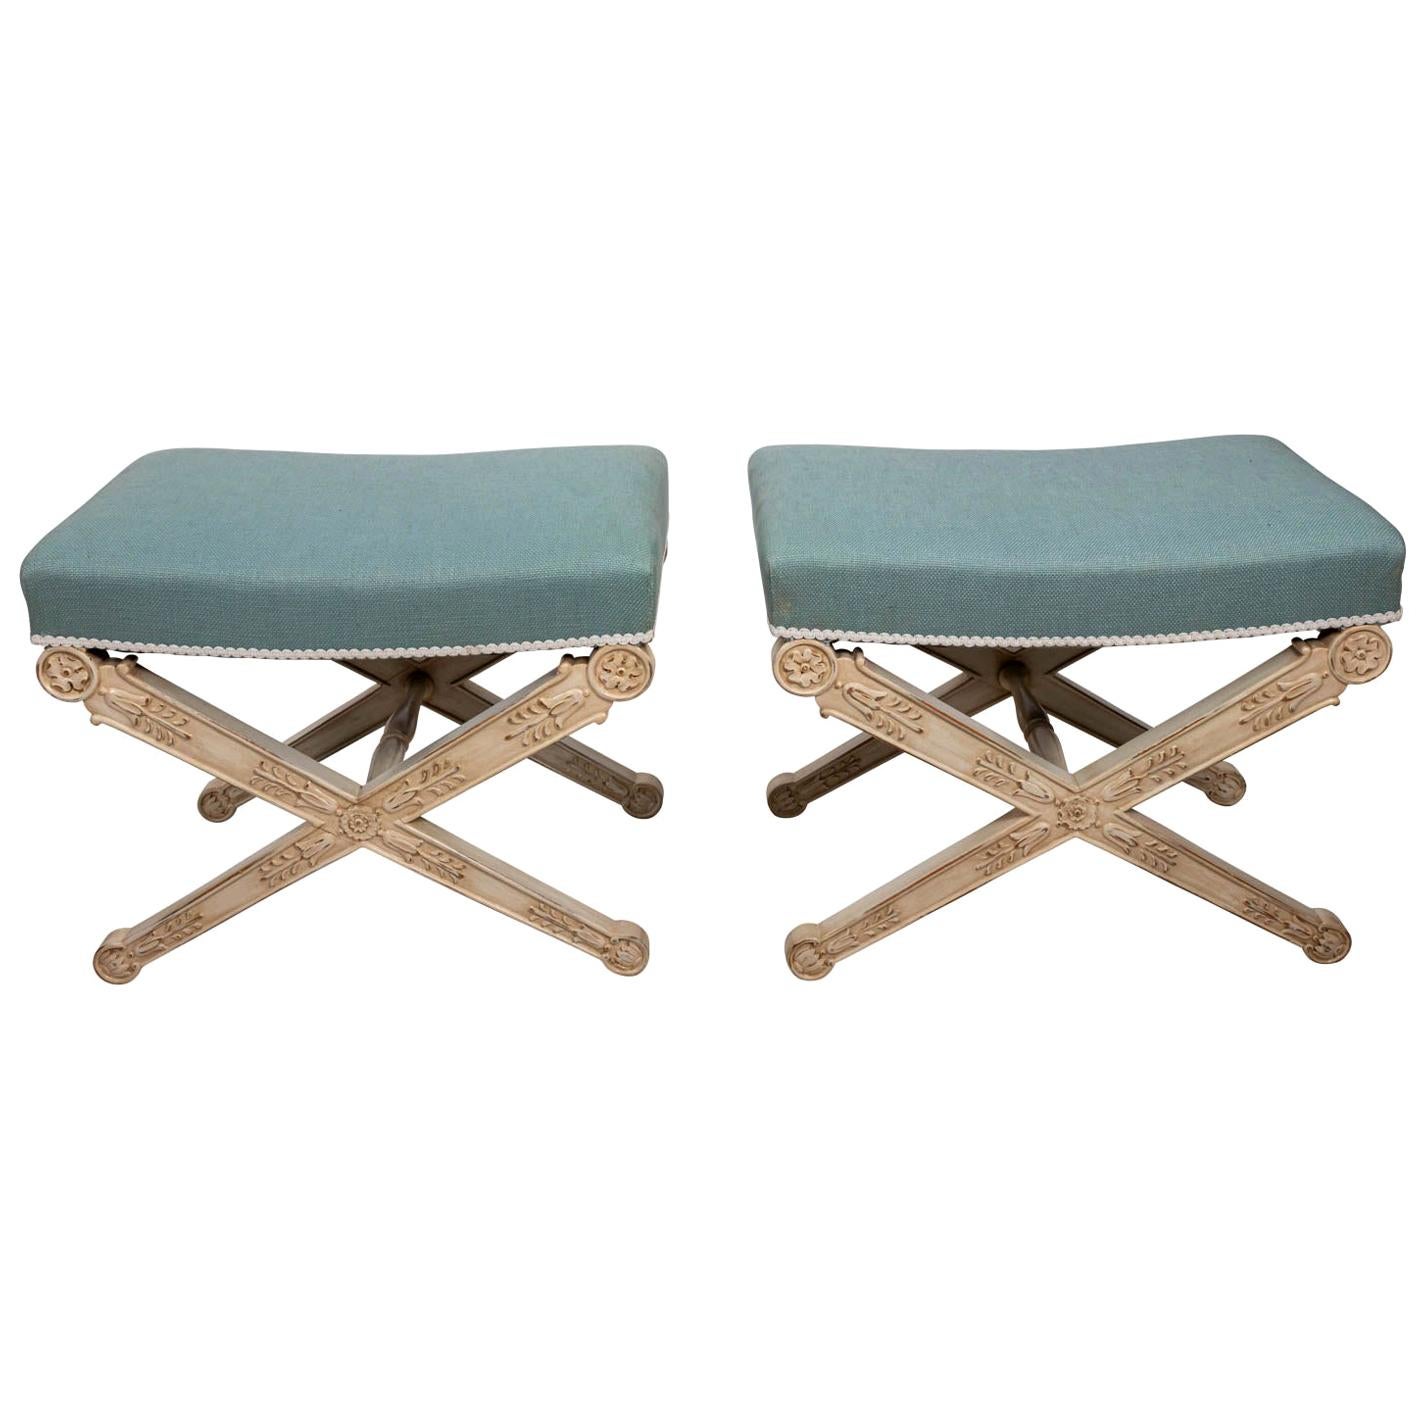 Pair of Tiffany Blue X-Form Benches